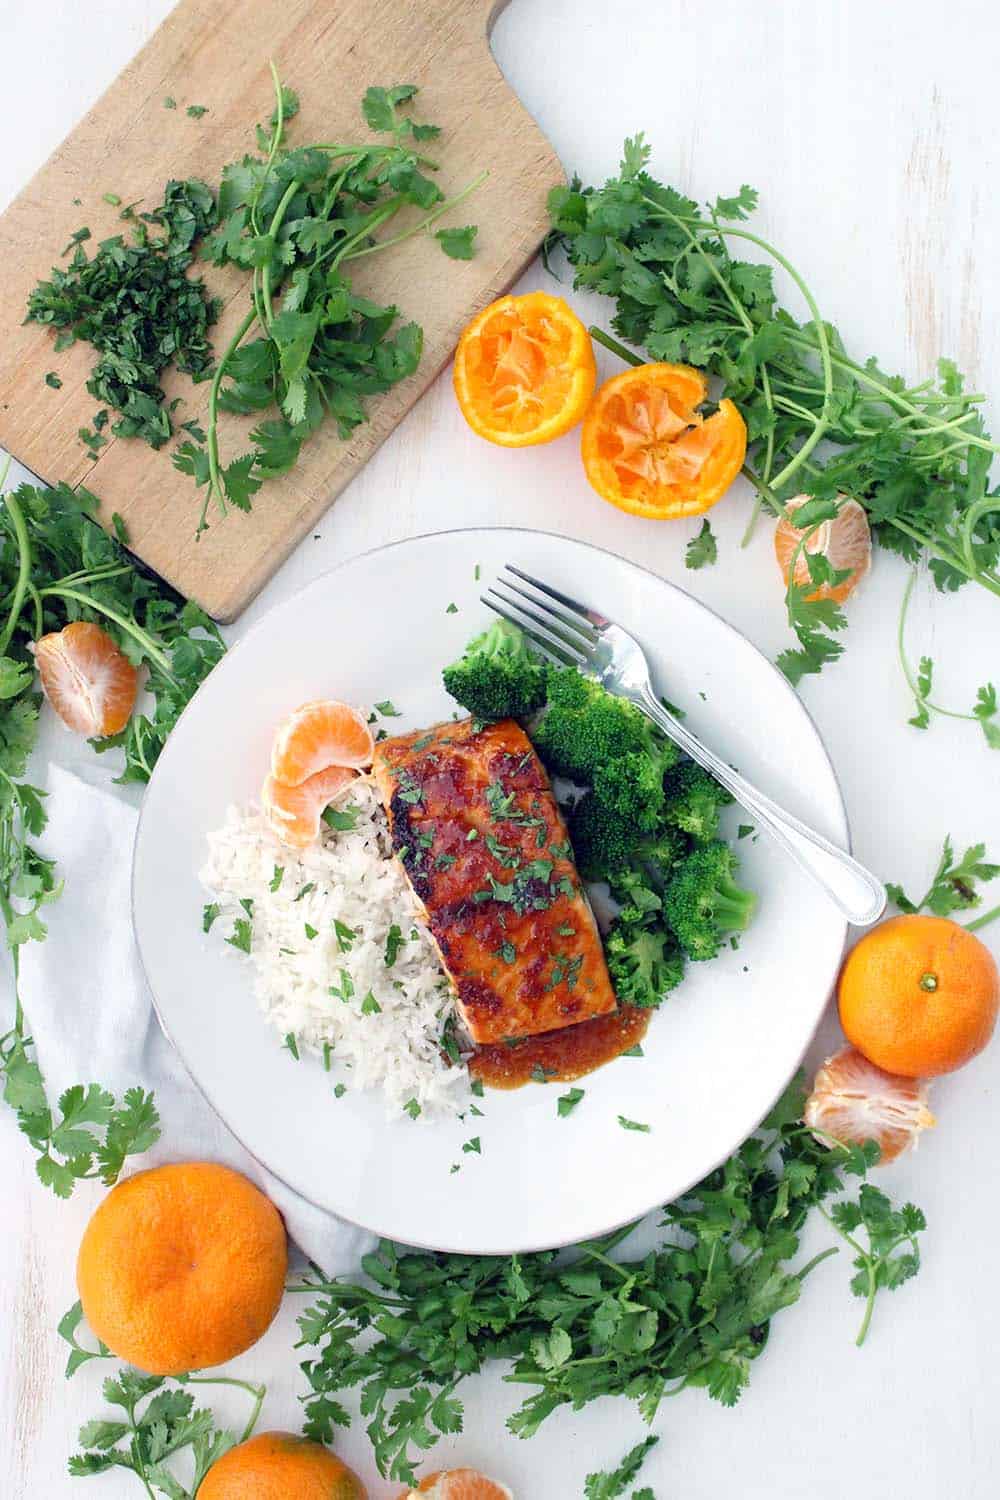 This colorful and healthy Mandarin Orange Glazed Salmon takes only 15 minutes to make and is broiled to perfection to create a sticky, thick glaze on top and keep the salmon moist and flaky. #Salmon #BroiledSalmon #MandarinOrange #SalmonRecipes #HealthyDinner #FastDinner #EasyRecipes